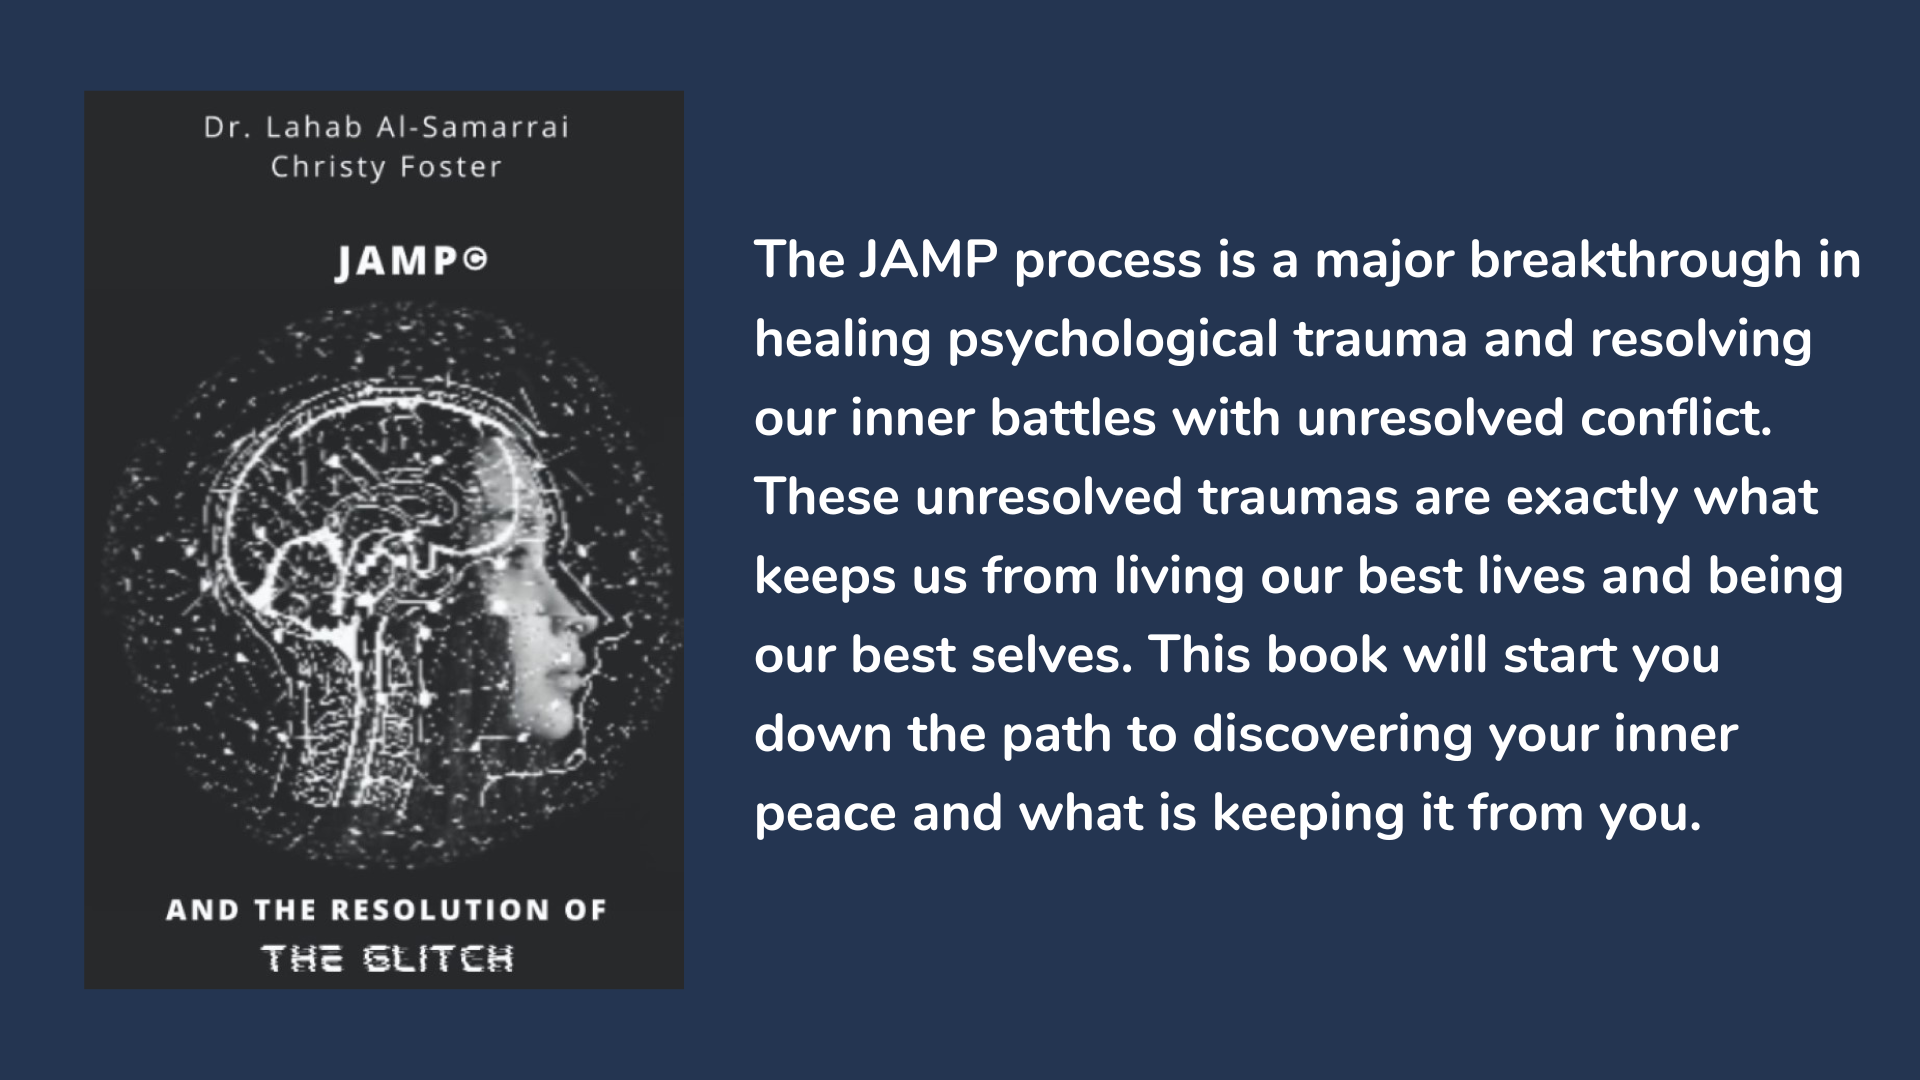 JAMP and The Resolution of the Glitch, book cover and description.